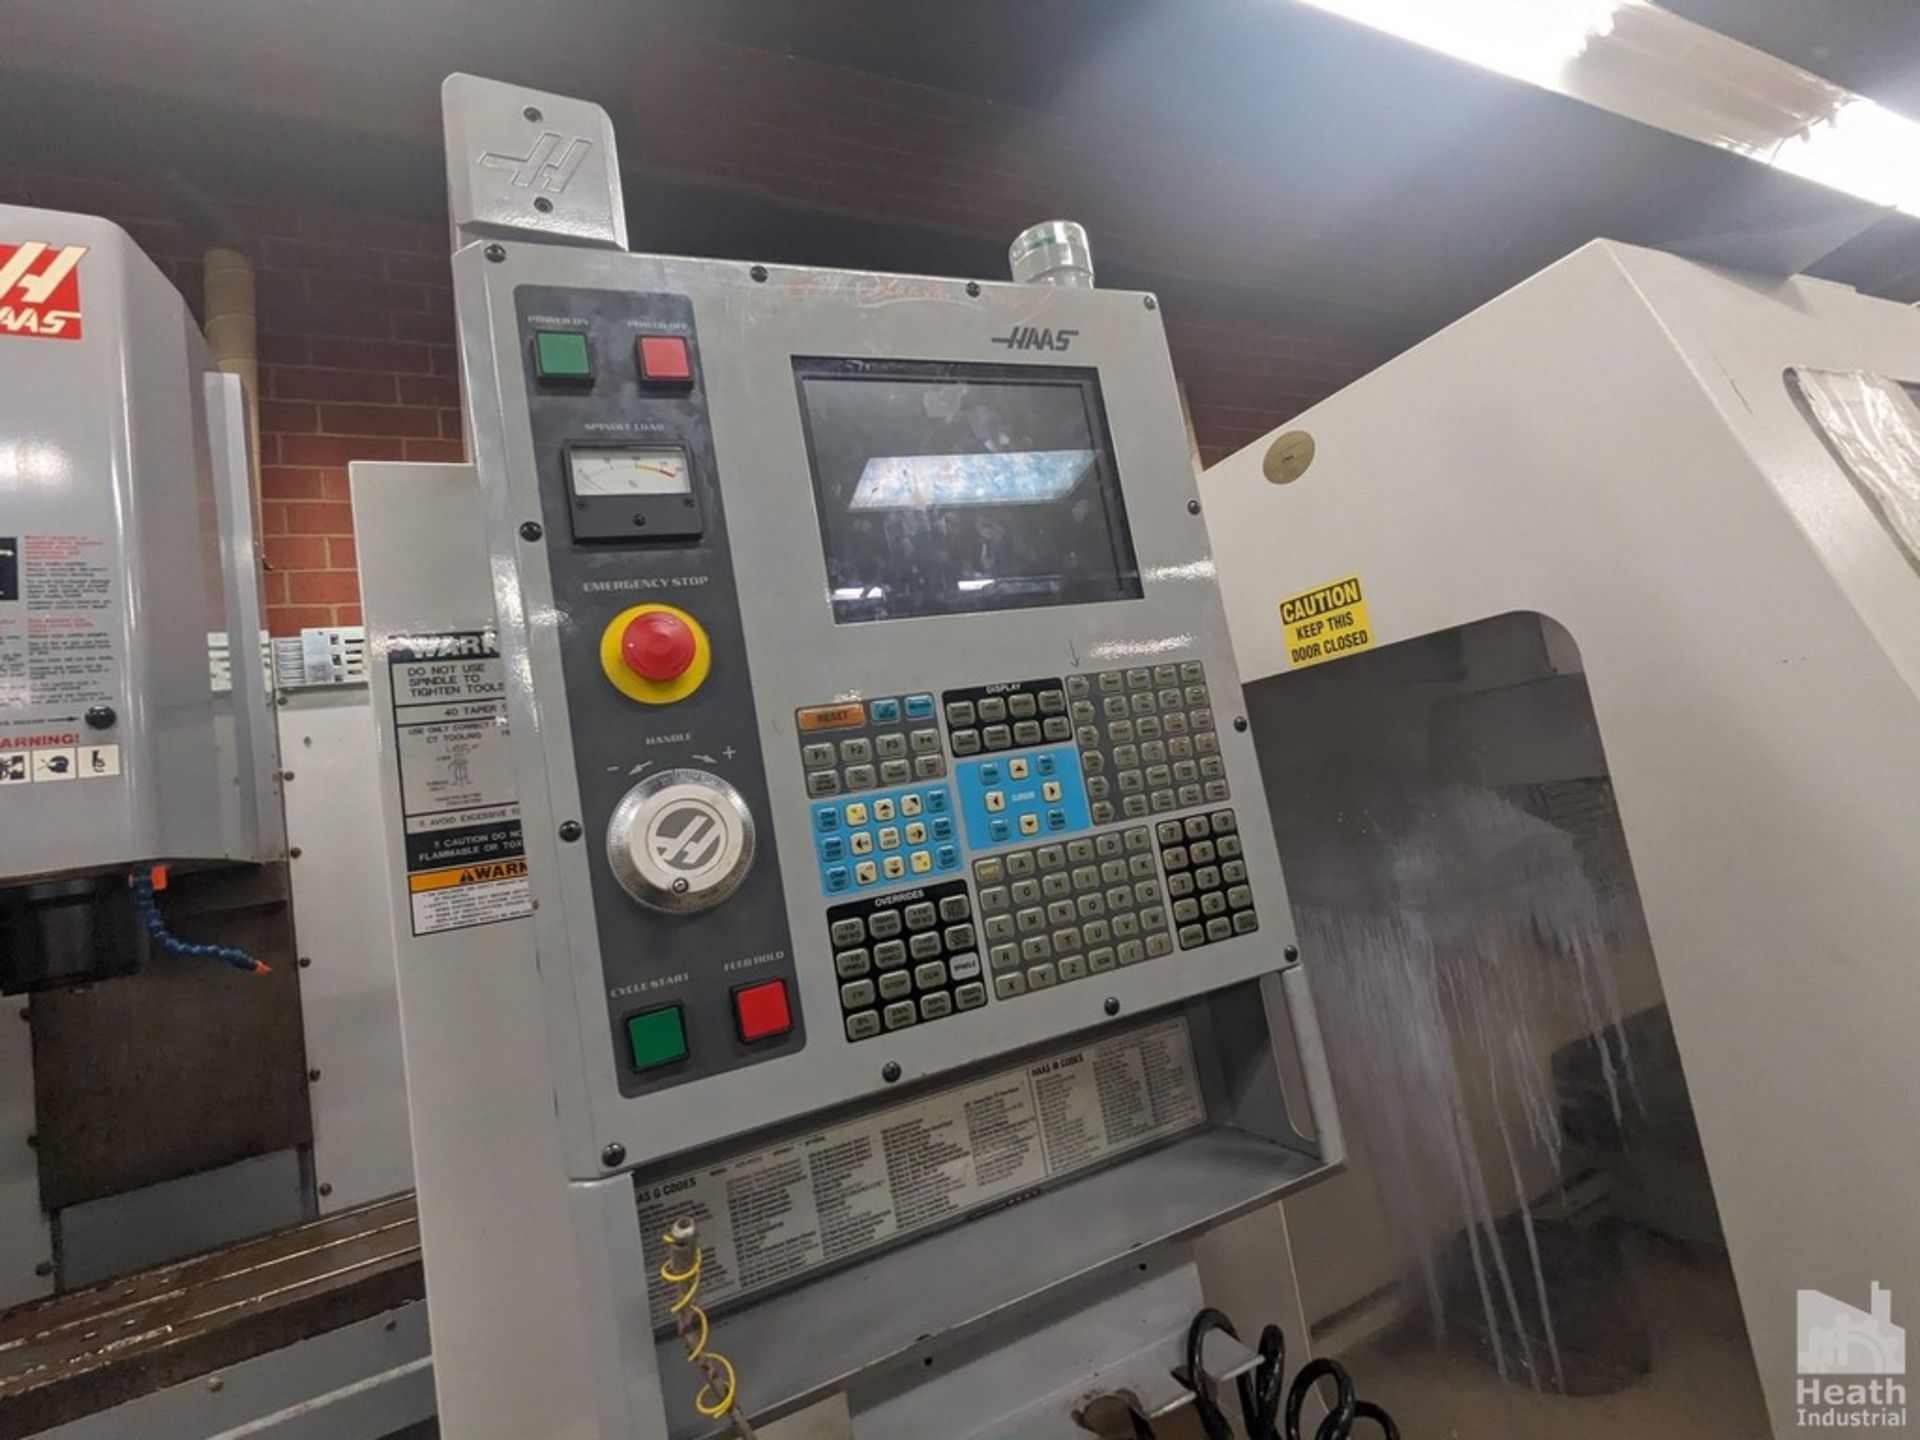 HAAS 3-AXIS MODEL MINI MILL CNC VERTICAL MACHINING CENTER, S/N 42775(NEW 2005) 12"X29" TABLE, 16" - Image 7 of 8